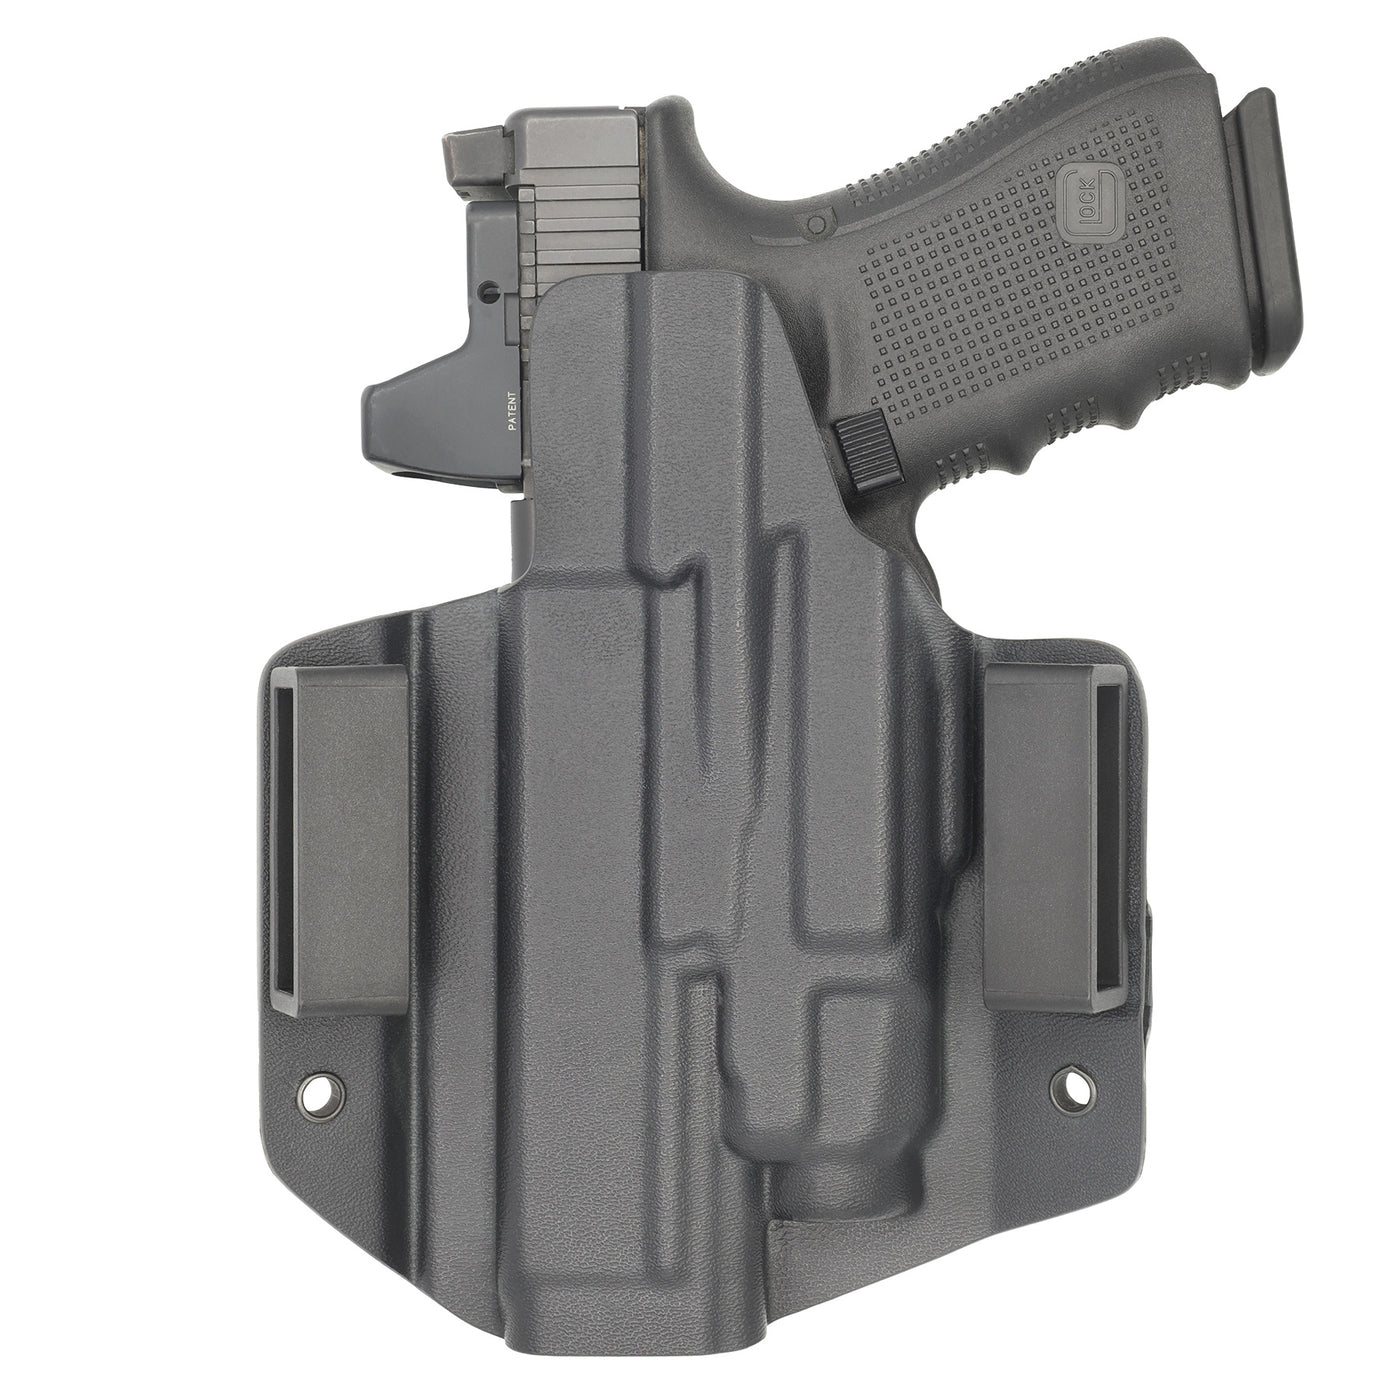 C&G Holsters Custom OWB Tactical Glock 19/23 Streamlight TLR7 in holstered position back view